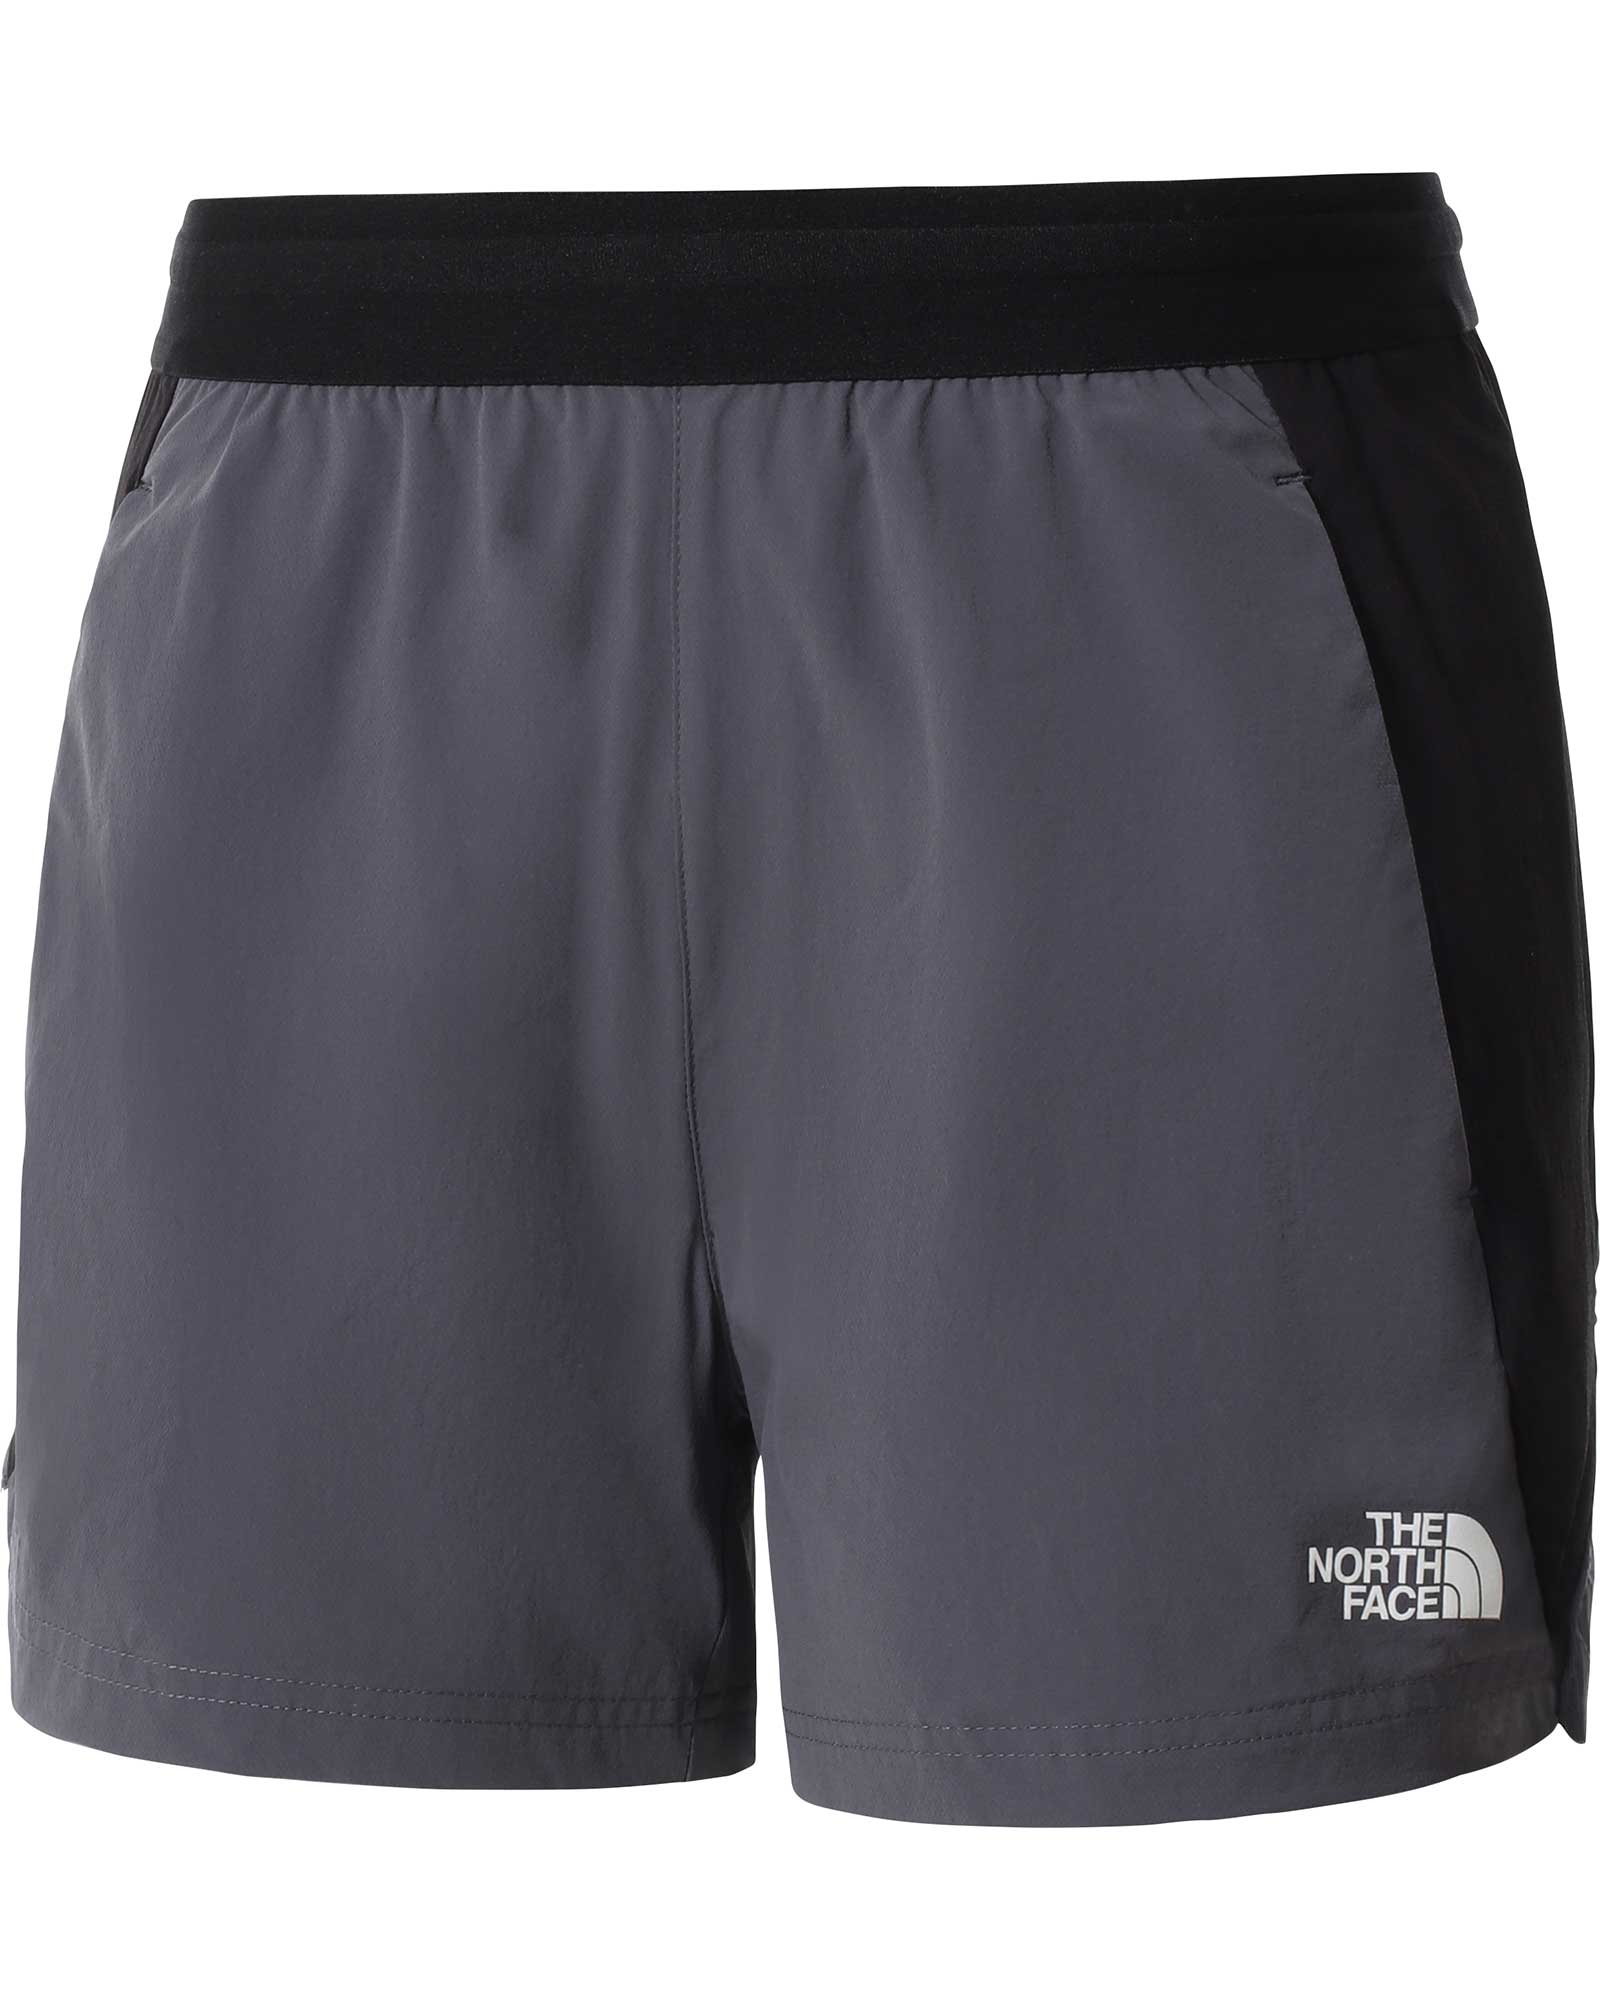 The North Face Ao Womens Woven Shorts